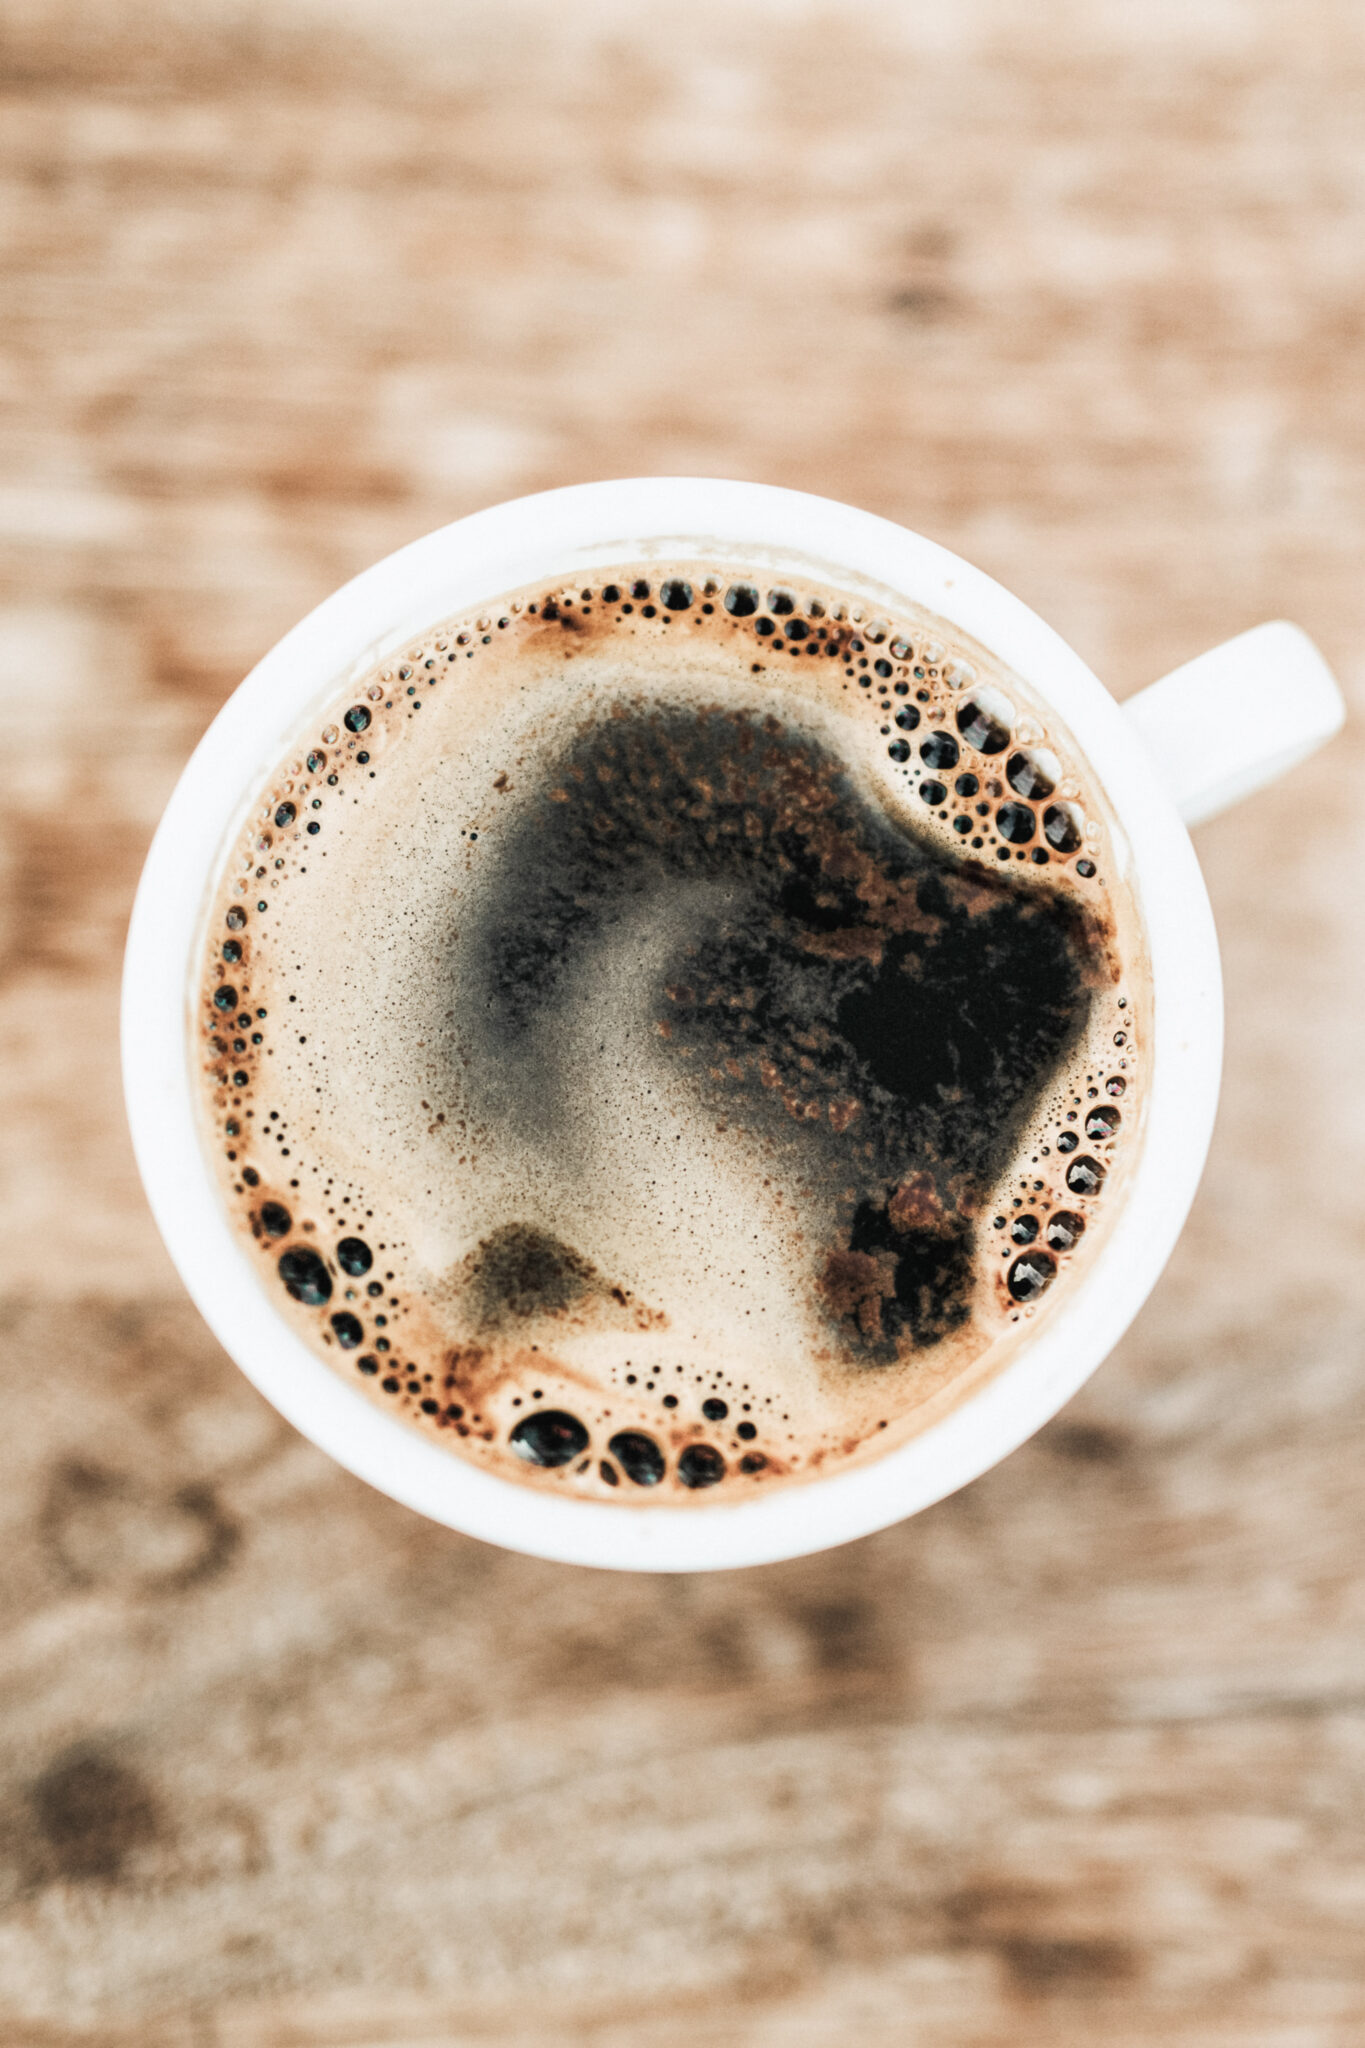 What Coffee Should You Drink Based on Your Mood